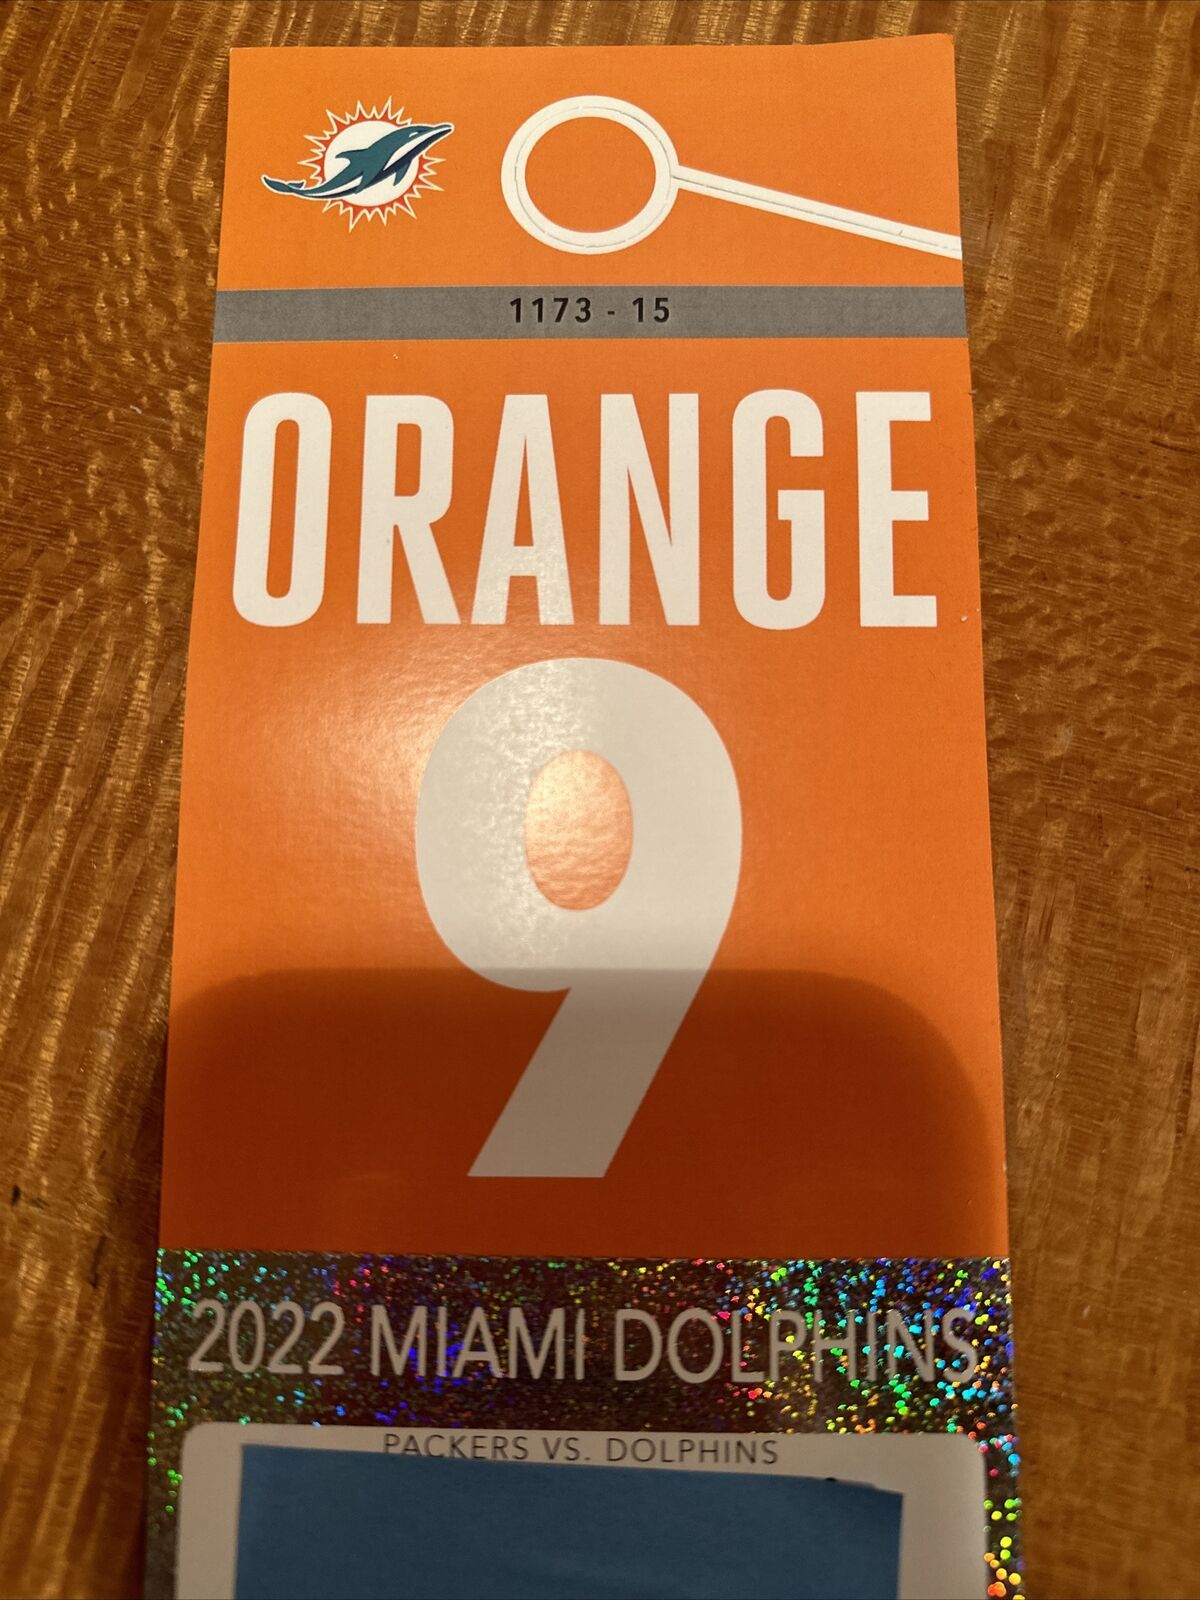 miami dolphins V Greenbay packers 12/25/22 ORANGE parking pass.Read Description!